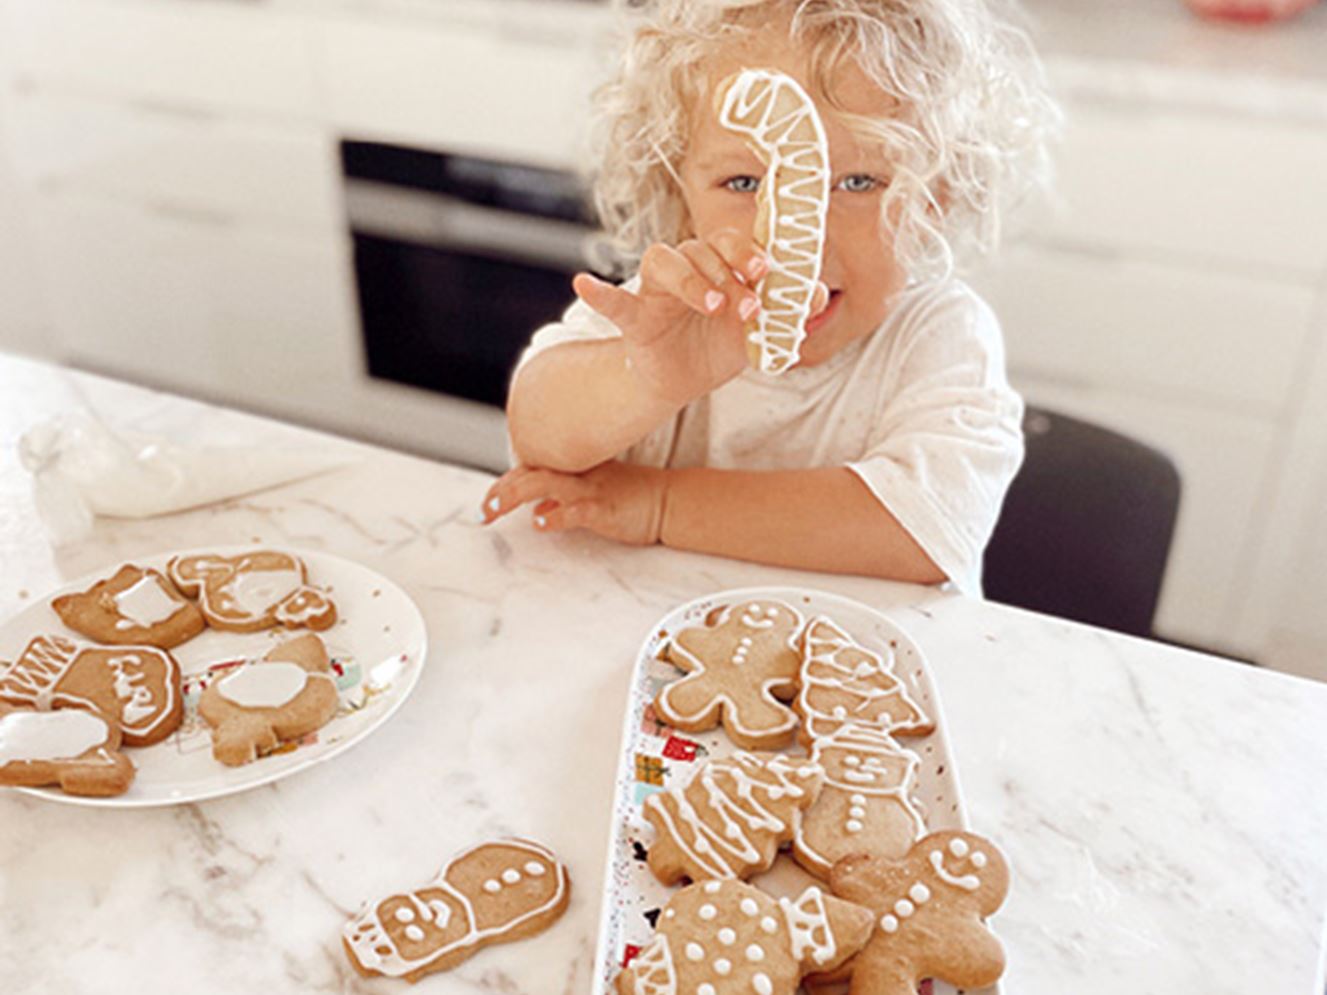 Toddler at kitchen bench holds a candy cane shaped ginger cookie in front of her face